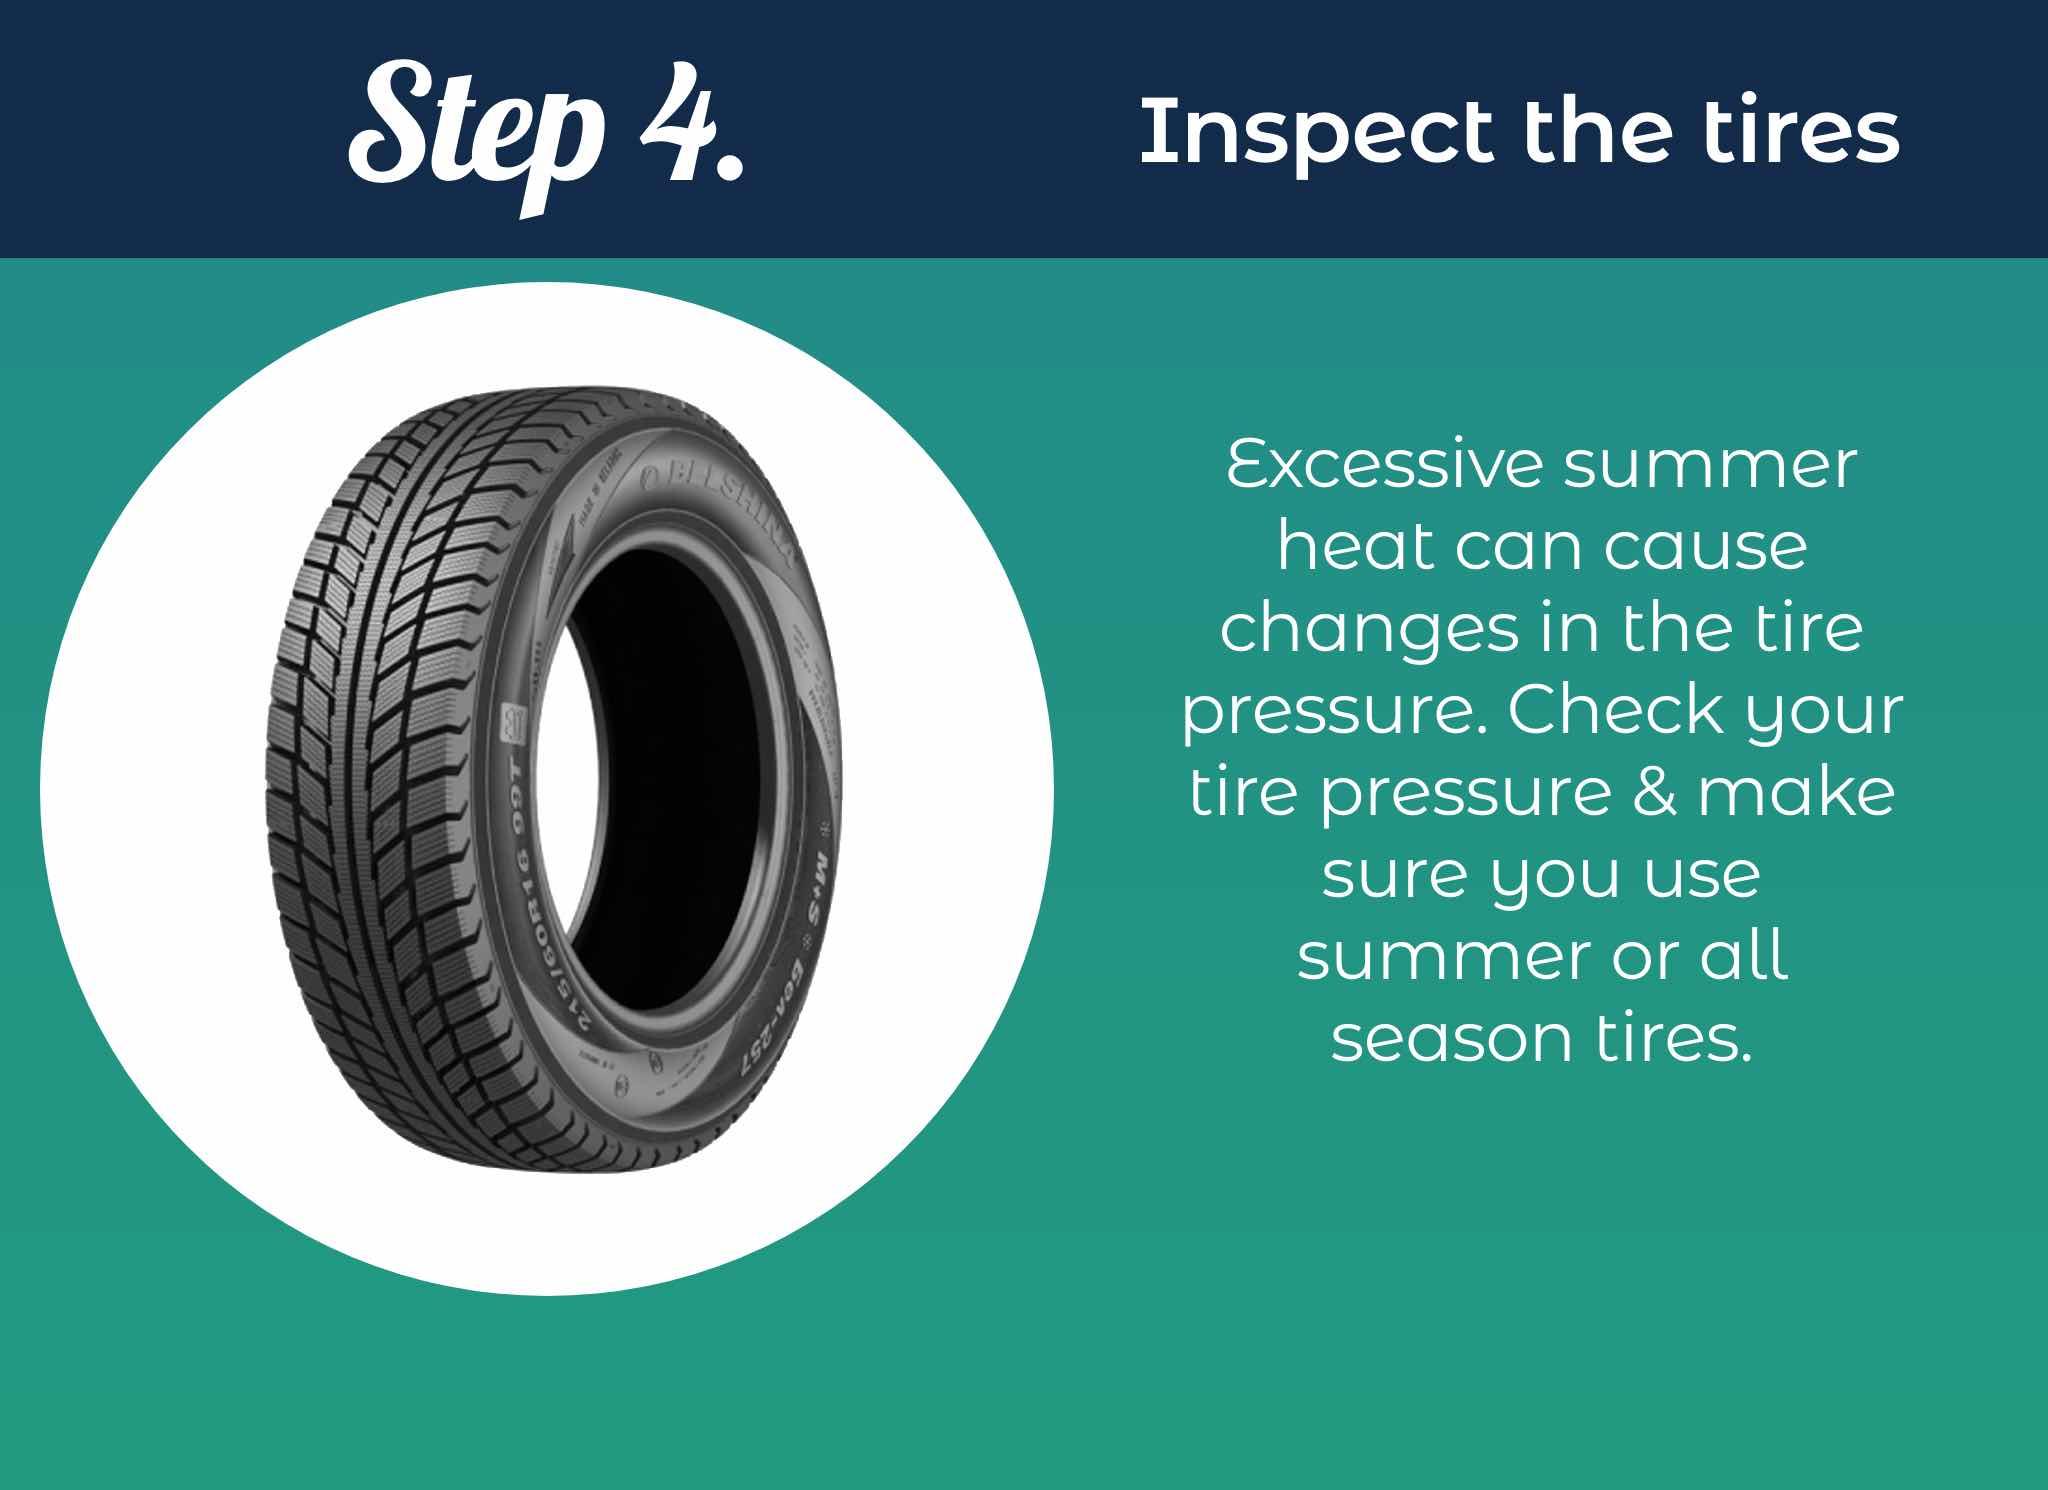 Excessive summer heat can cause changes in the tire pressure. Check your tire pressure & make sure you use summer or all season tires.